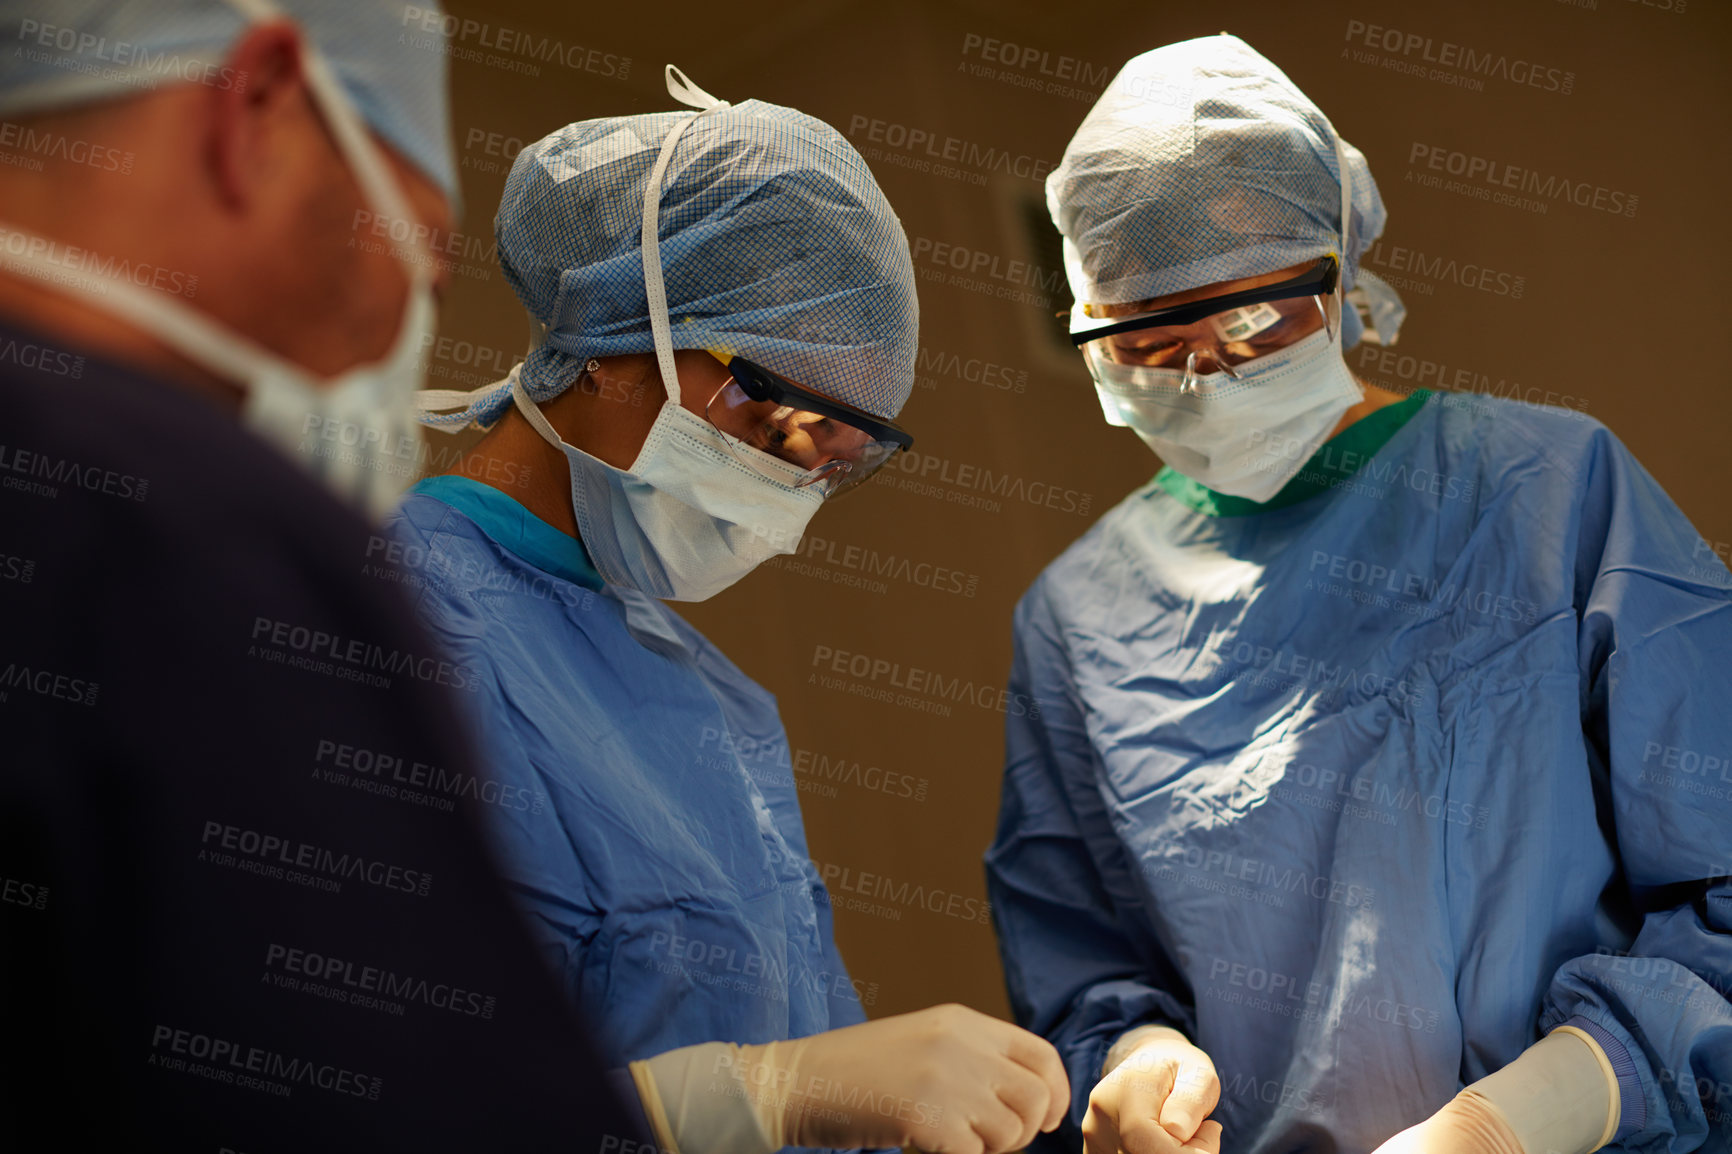 Buy stock photo Shot of a team of surgeons performing a surgical procedure in an operating room